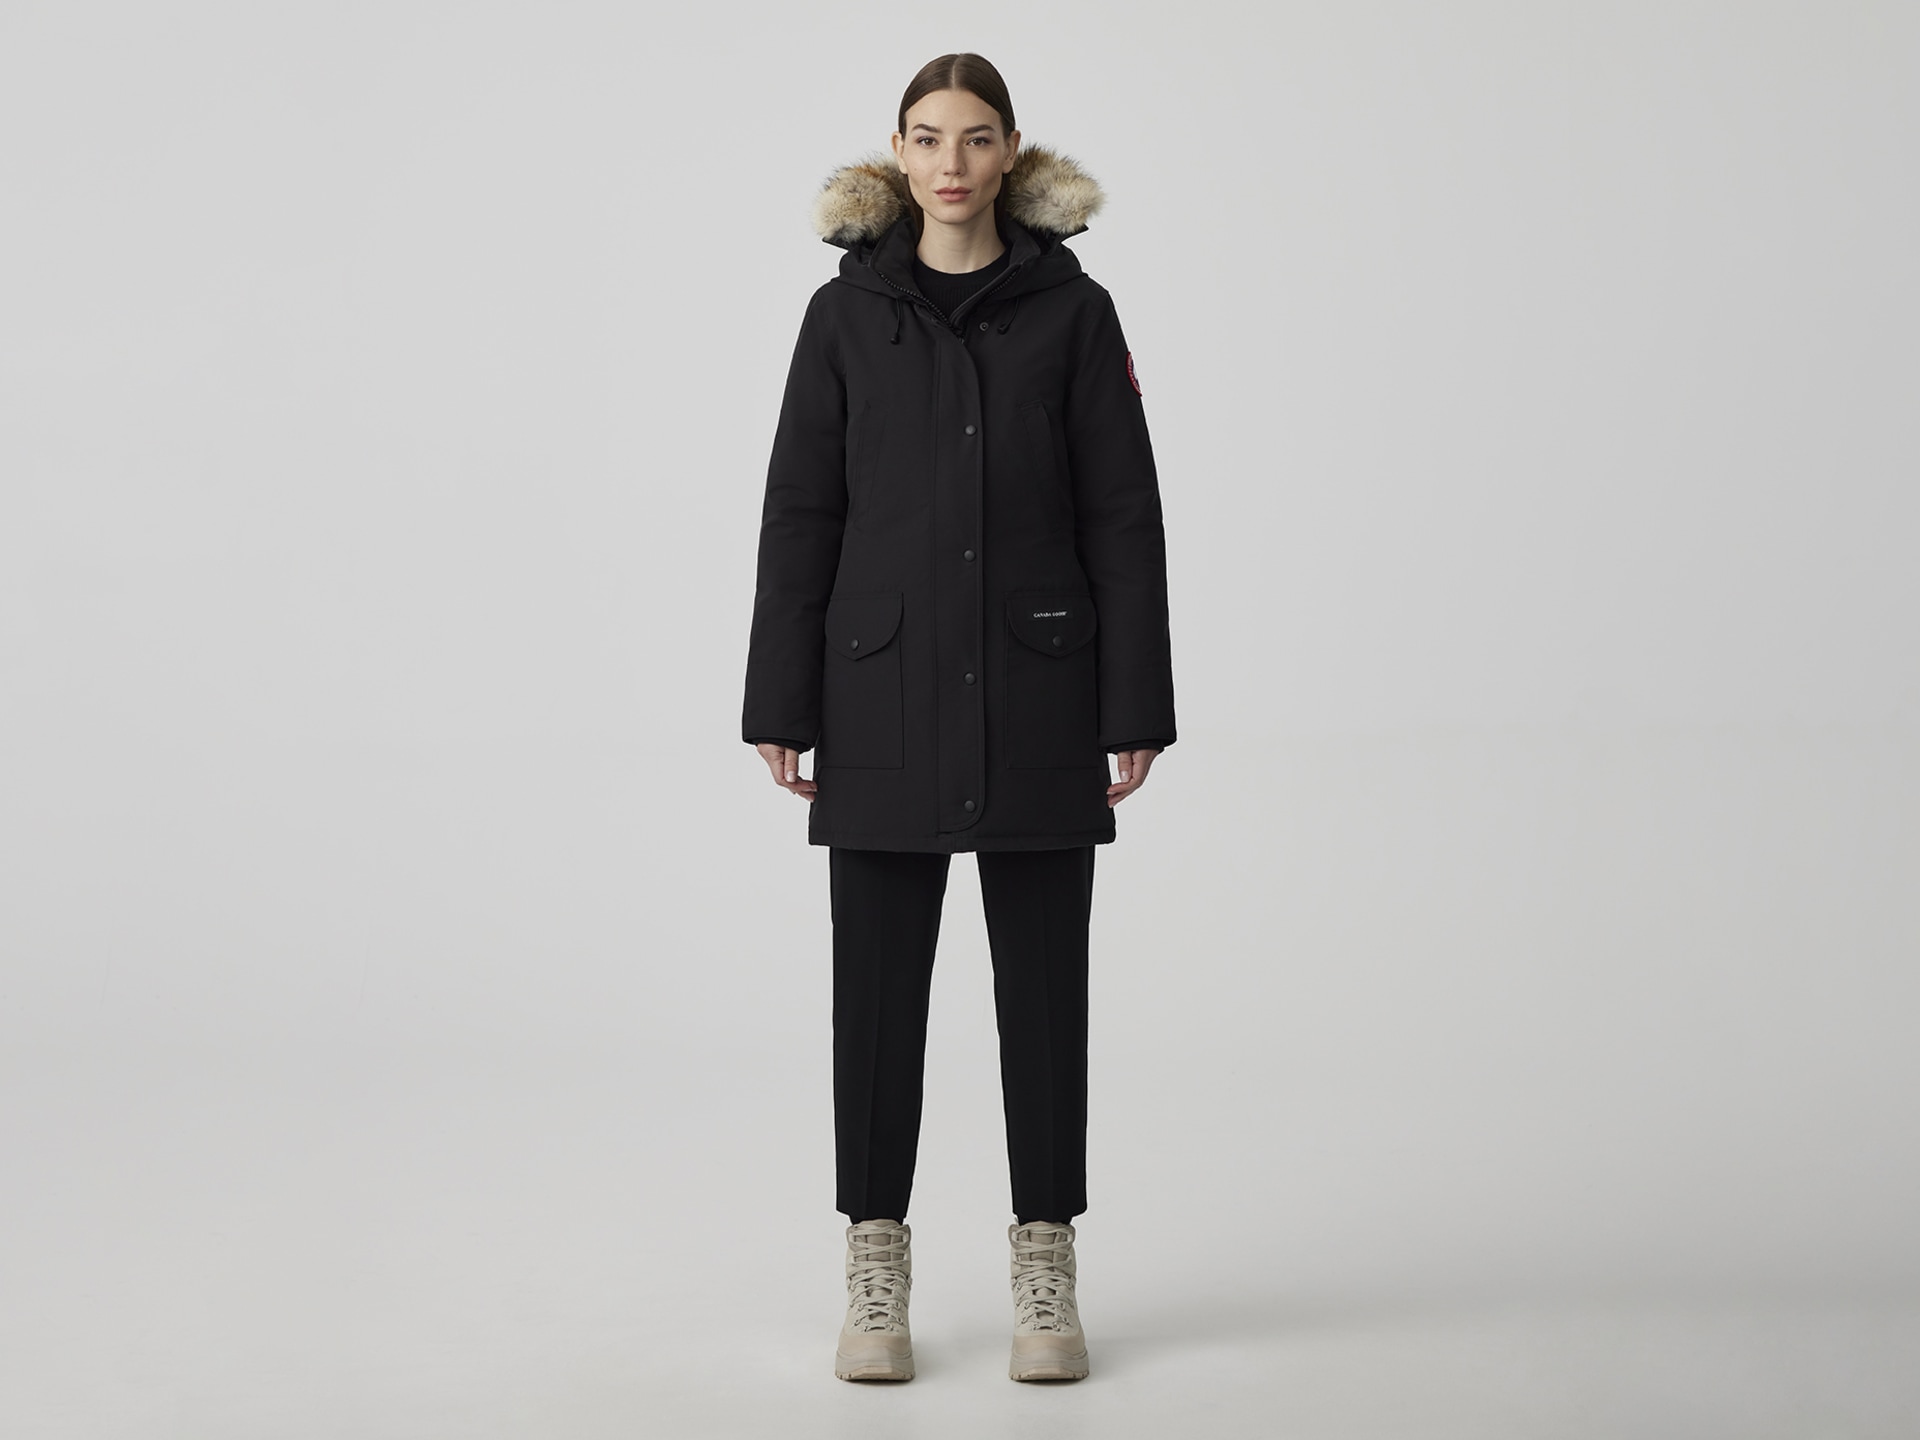 Unlock Wilderness' choice in the Canada Goose Vs North Face comparison, the Trillium Parka Heritage by Canada Goose